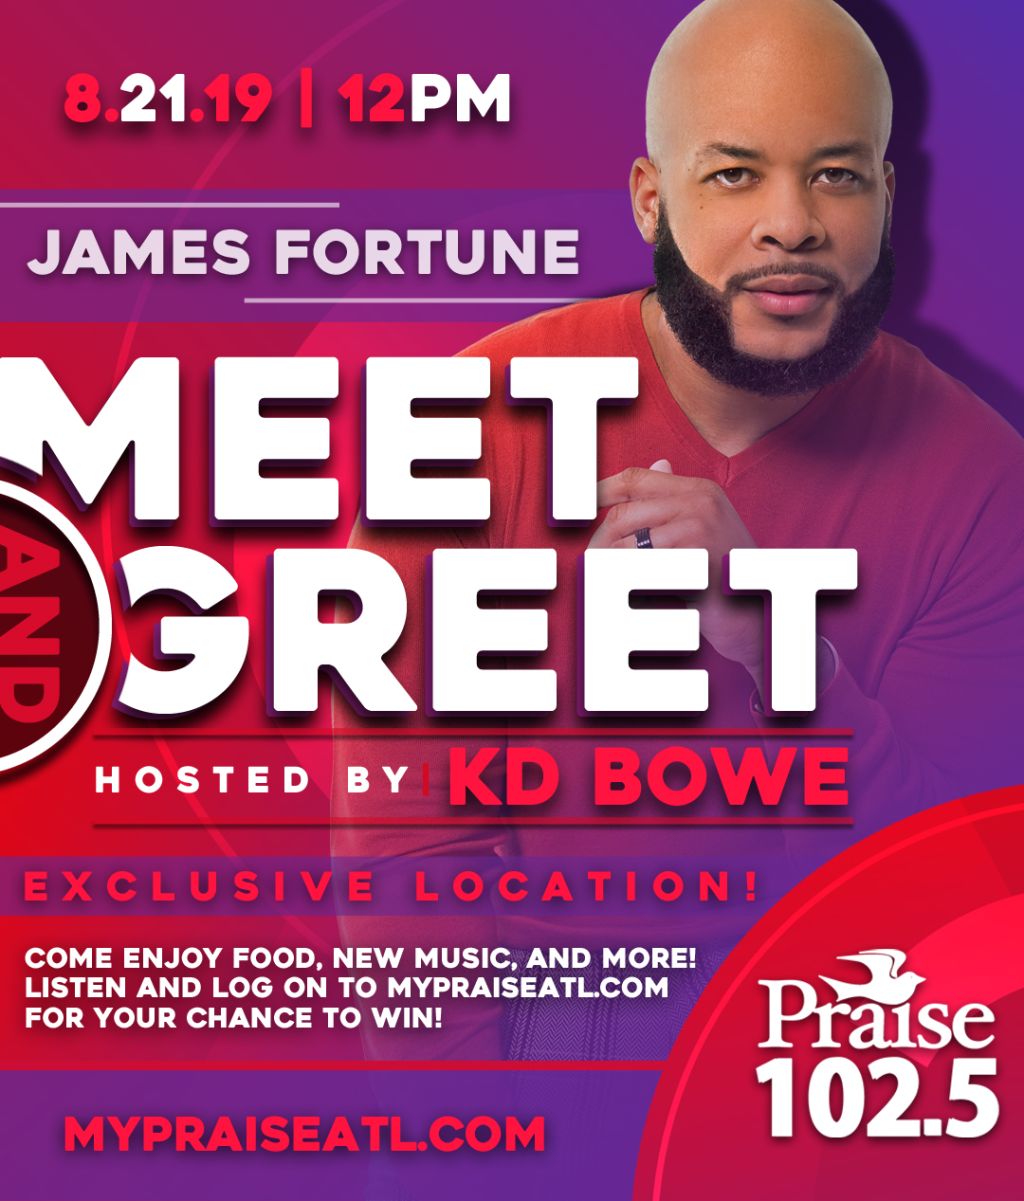 Praise 102.5 and James Fortune